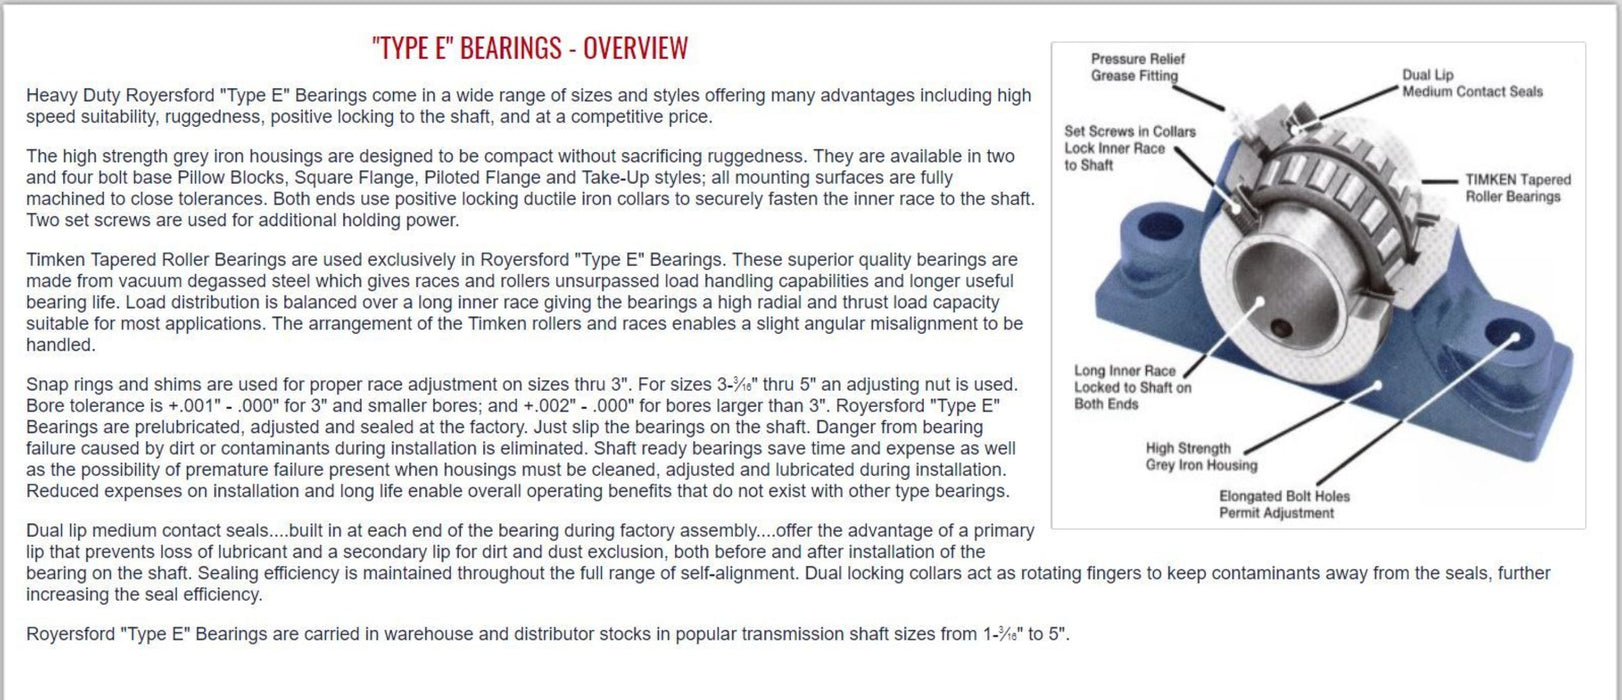 20-04-0304, Royersford Type E 4-Bolt Pillow Block Bearing, 3-1/4" with Timken Tapered Roller Bearings